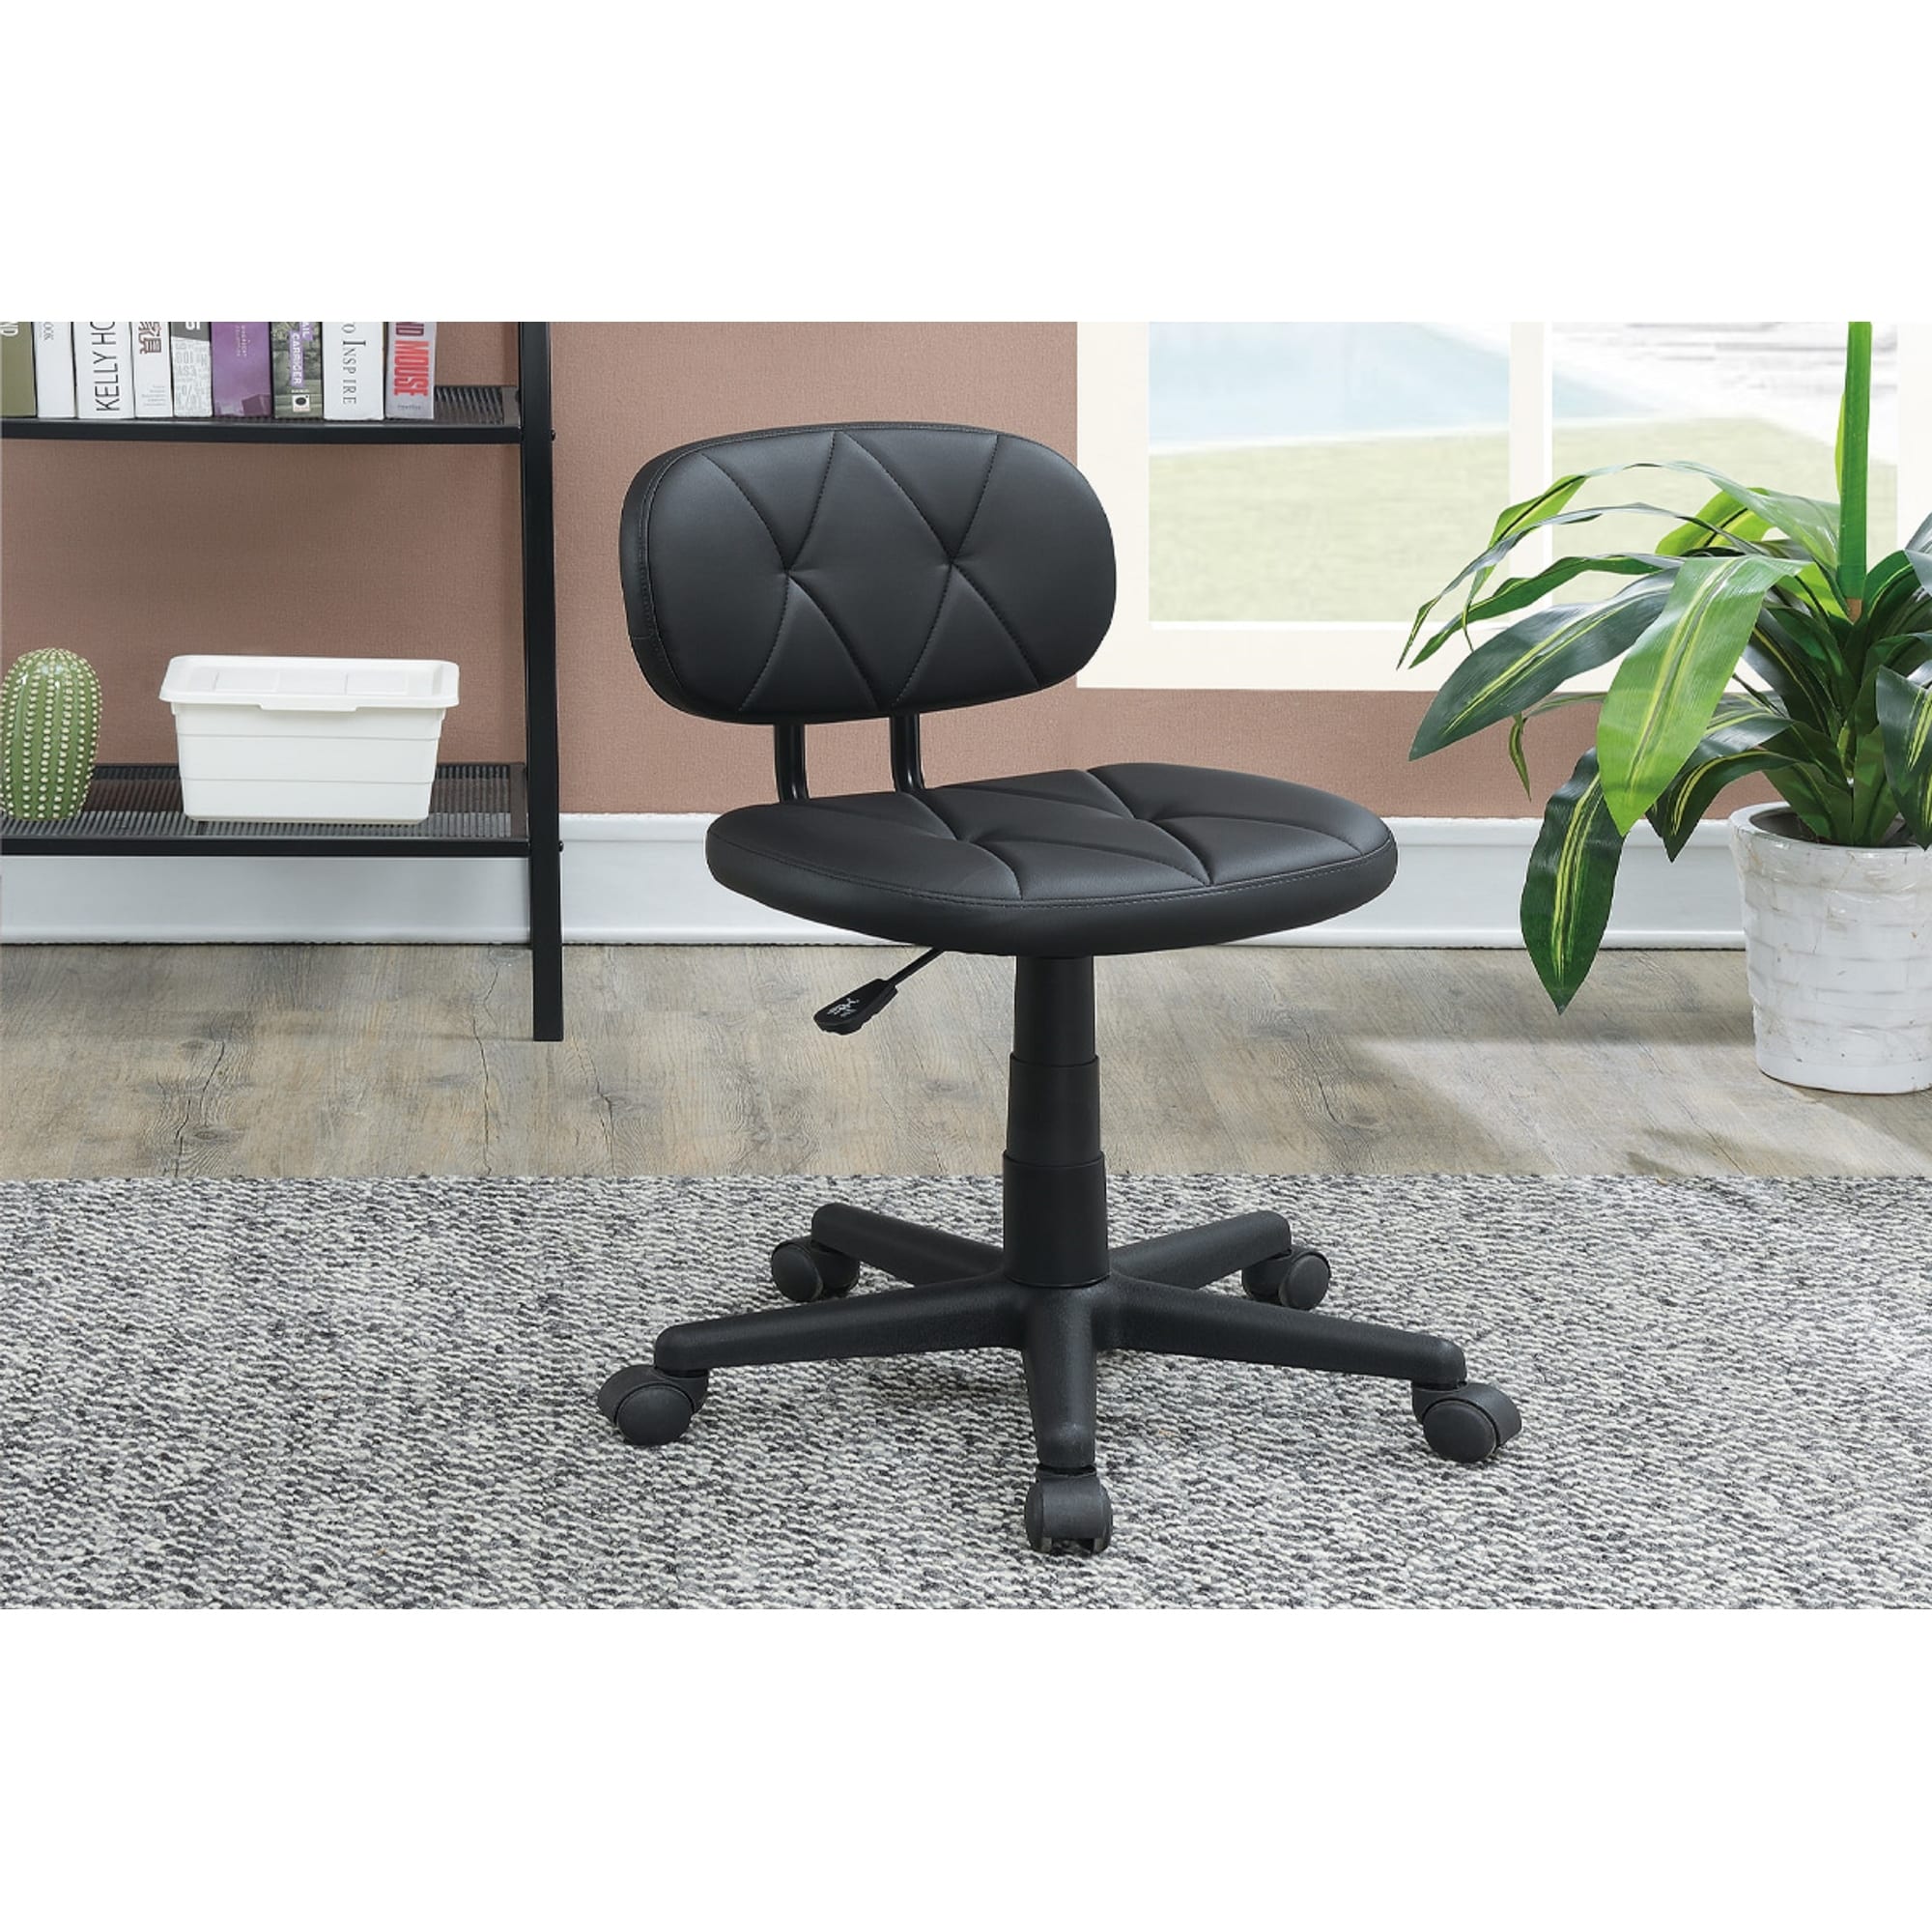 https://ak1.ostkcdn.com/images/products/is/images/direct/936212c83c0867e12ba621a9fbe99a7d1f7c9b43/Modern-Armless-Office-Desk-Chair---Height-Adjustable-with-Wheels-for-Small-Space%2C-Black%2C-21%22D-x-24%22W-x-31%22H.jpg